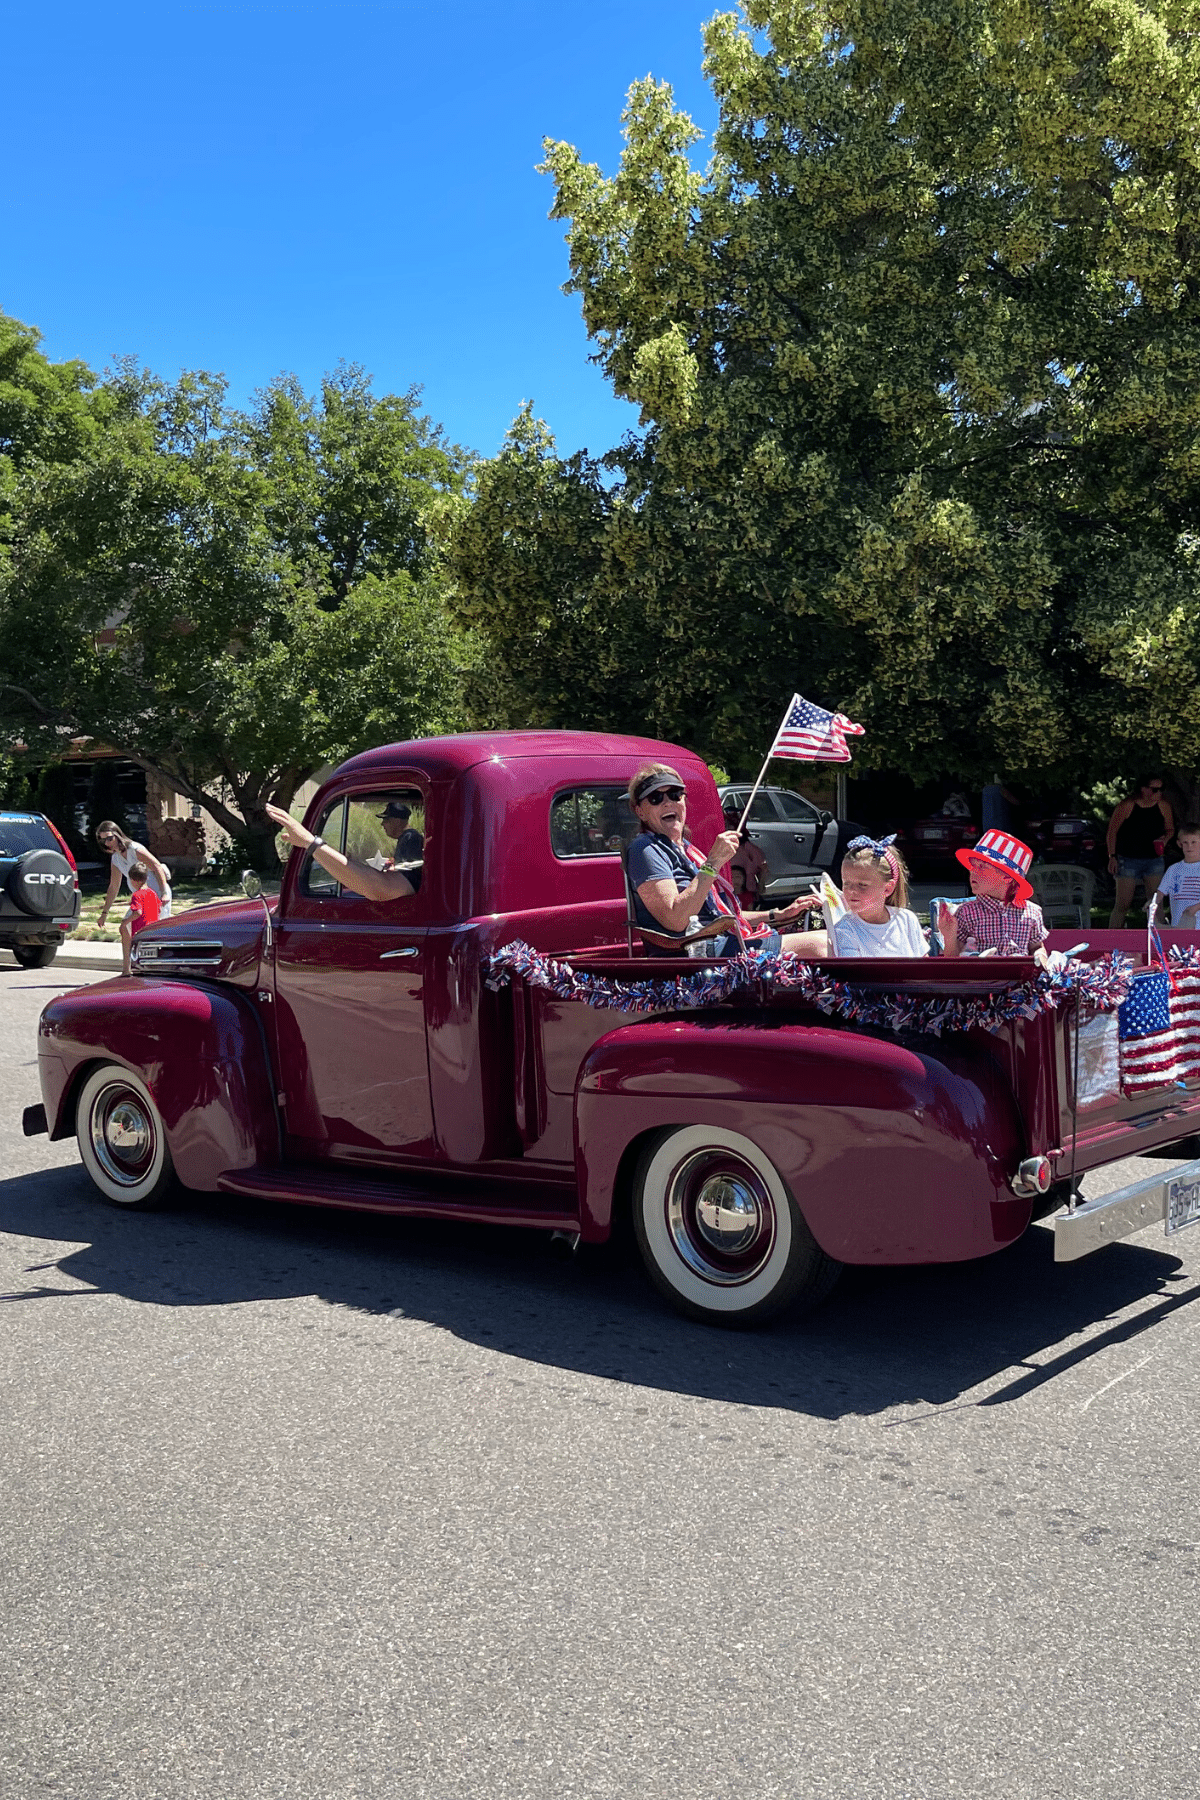 Classic old pick up truck decorated for 4th of  July with people sitting in back waving American flag. 